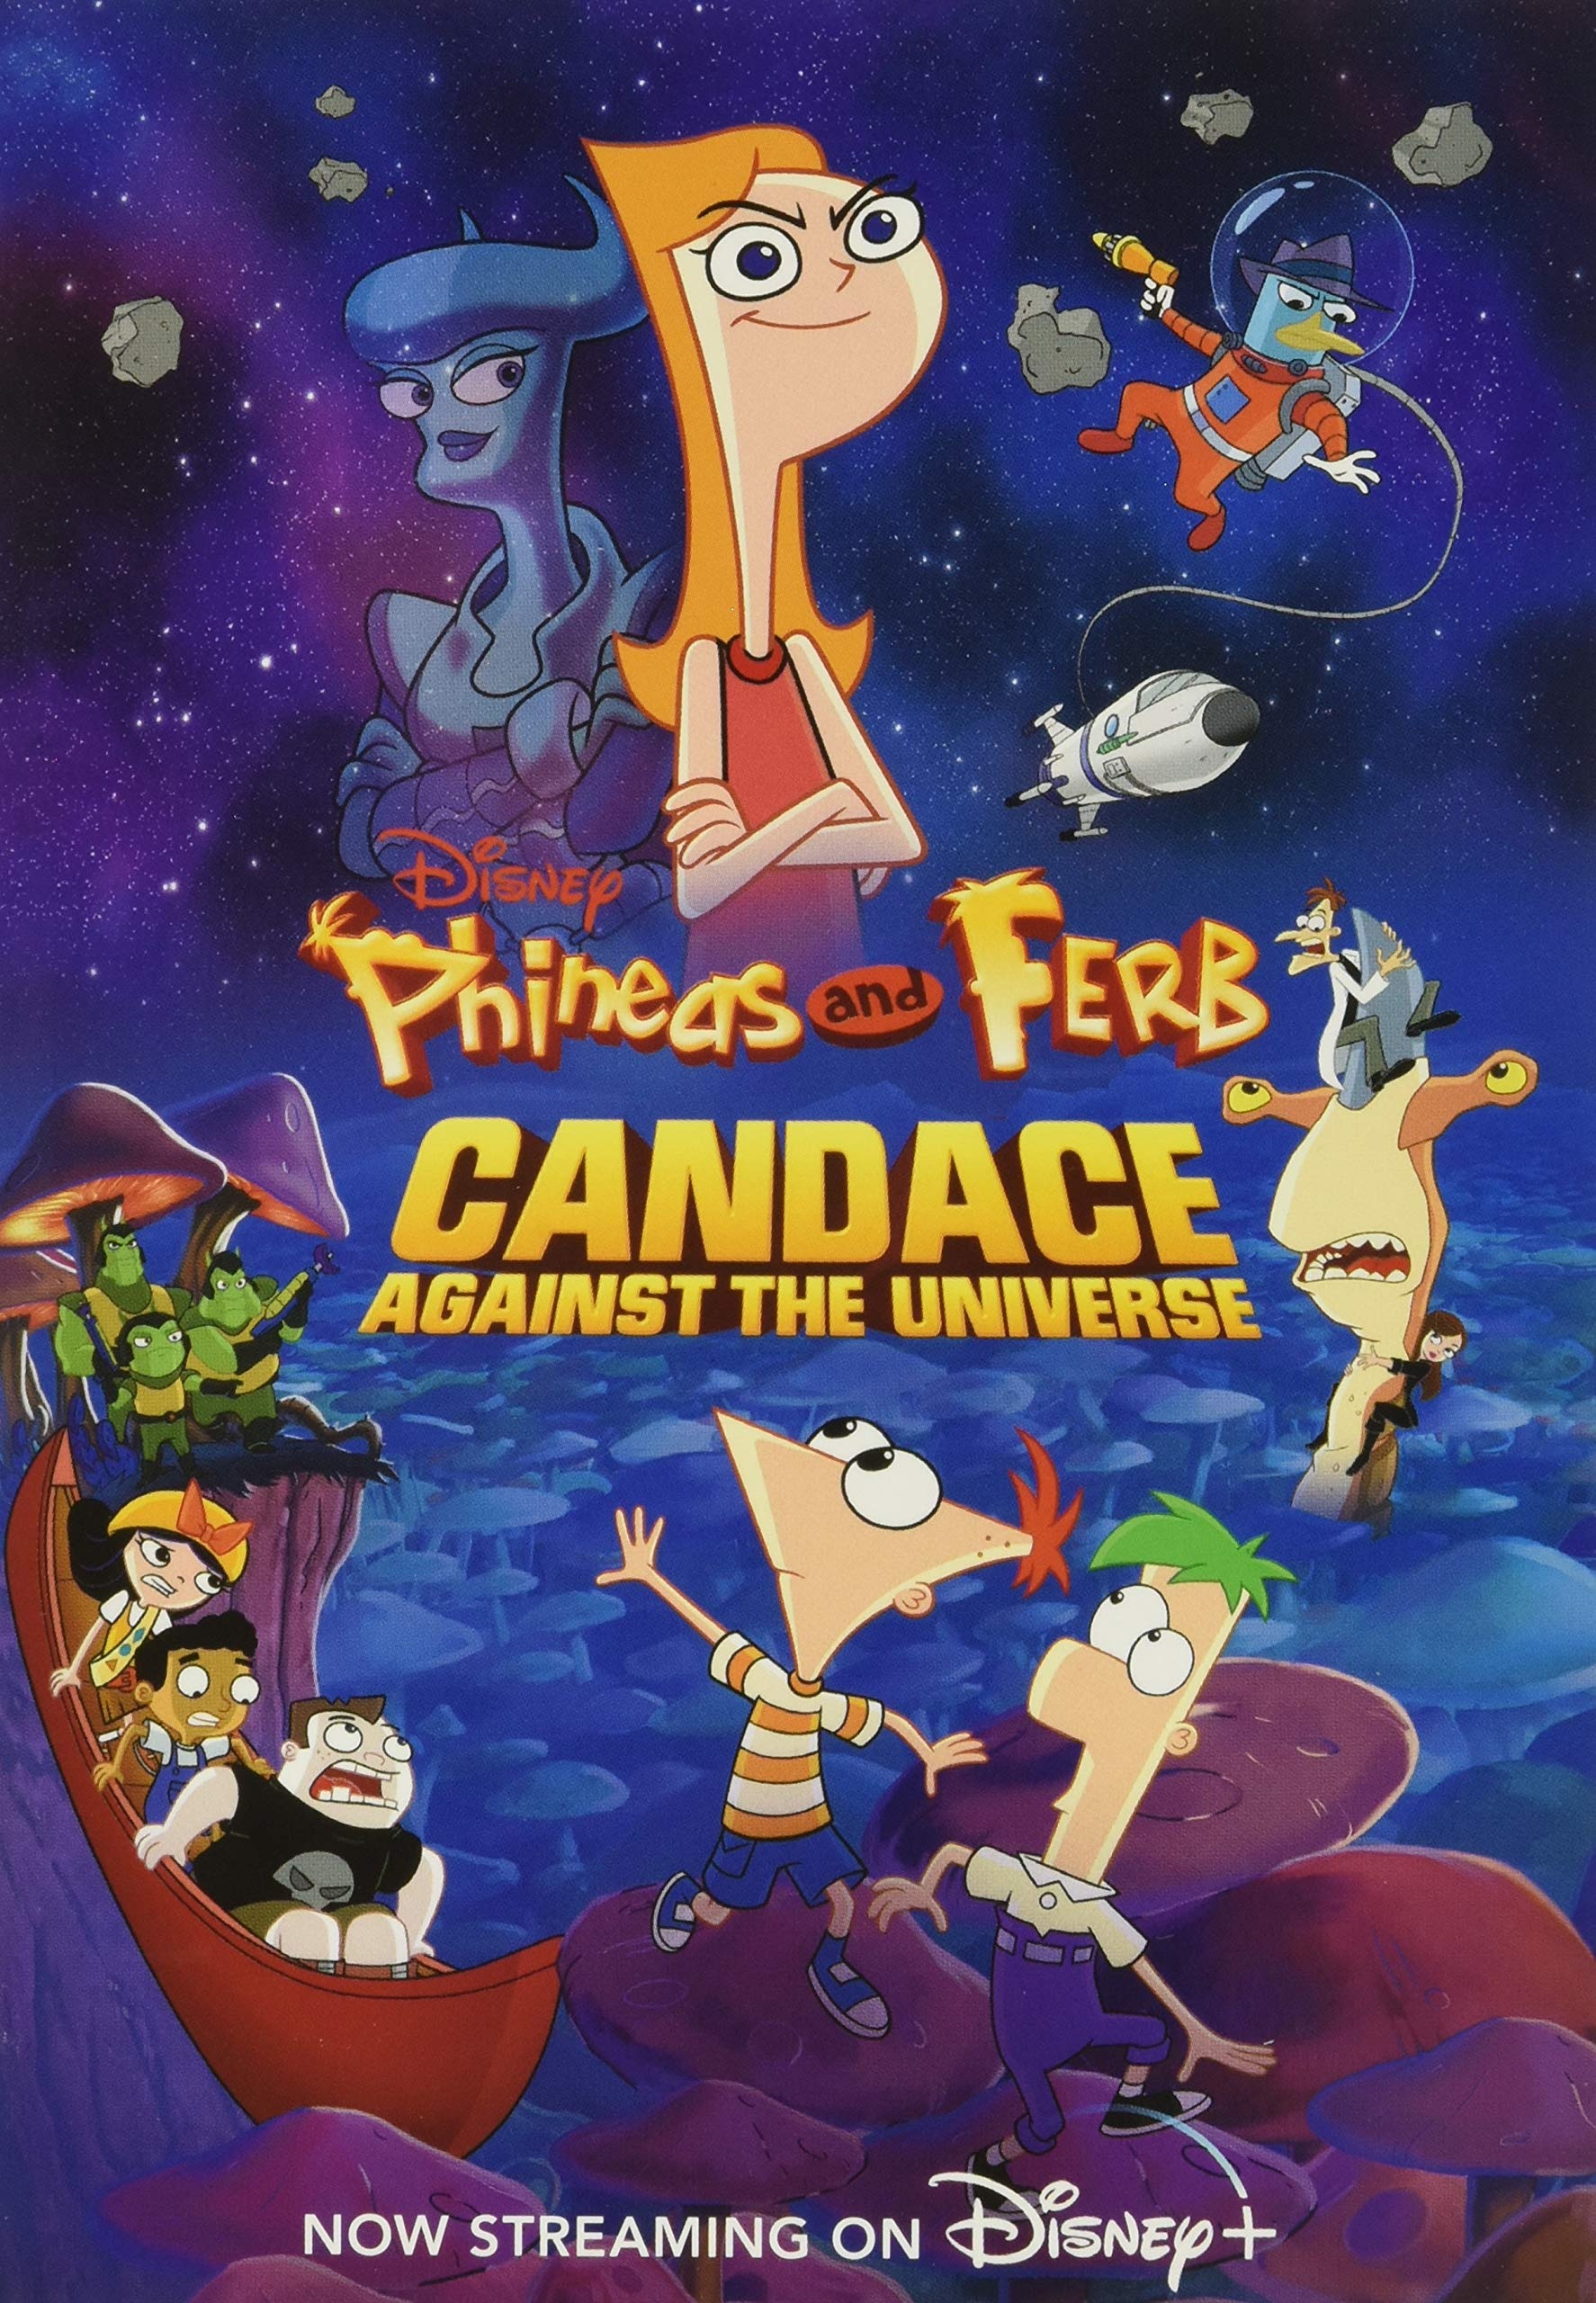 Phineas and Ferb, Candace Against the Universe, Disney books, Disney storybook art team, 1780x2560 HD Phone